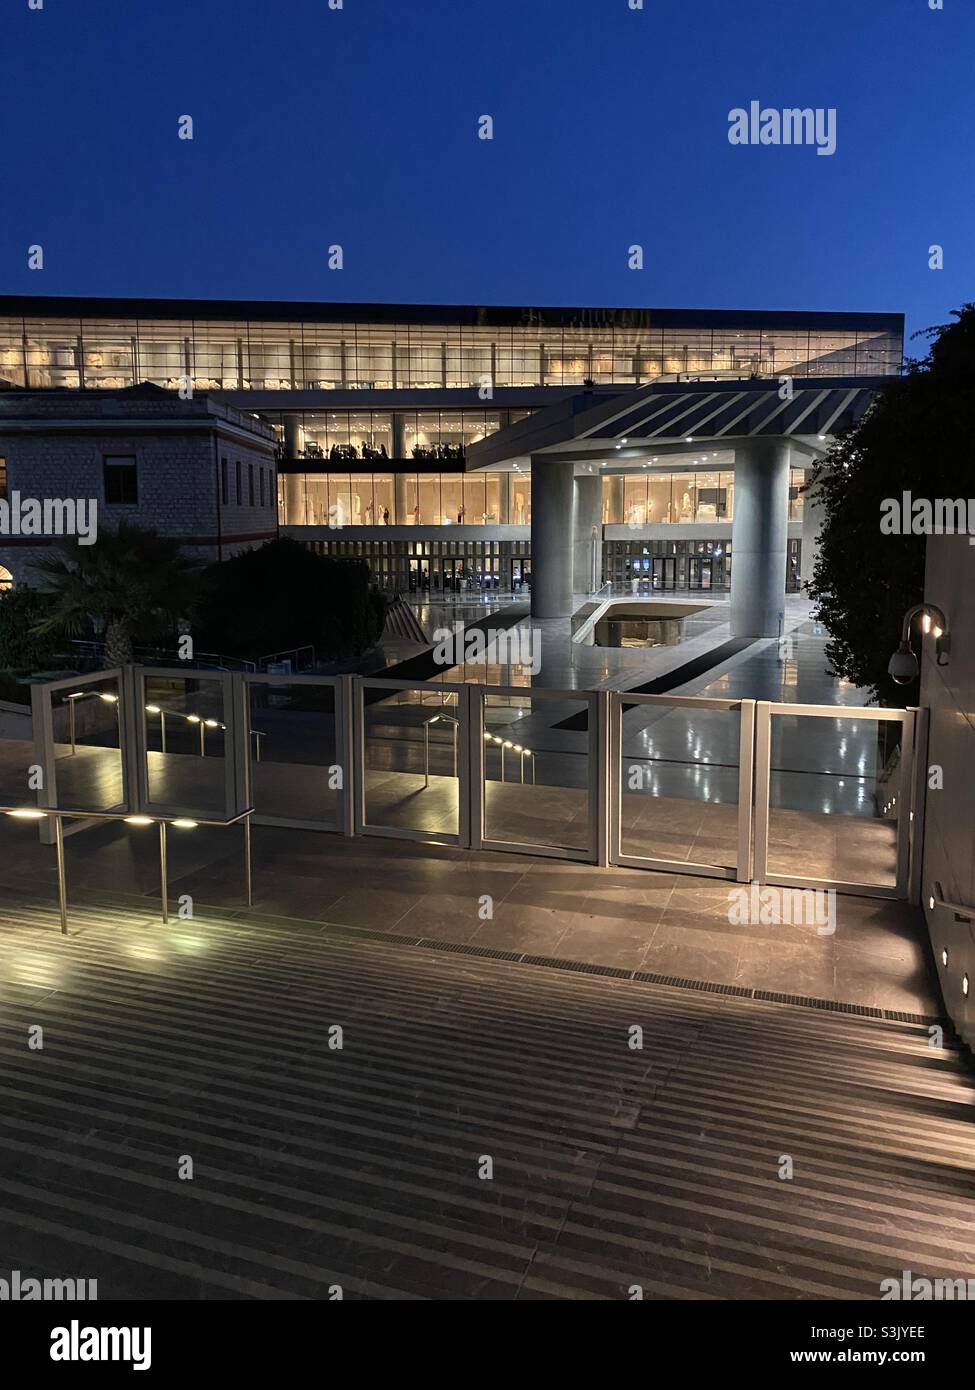 The world class Acropolis Museum of Athens, Greece, designed by Tschumi & Photiades, and opened in 2009. It is on the slopes of the Acropolis and has won many European and World Awards. Stock Photo